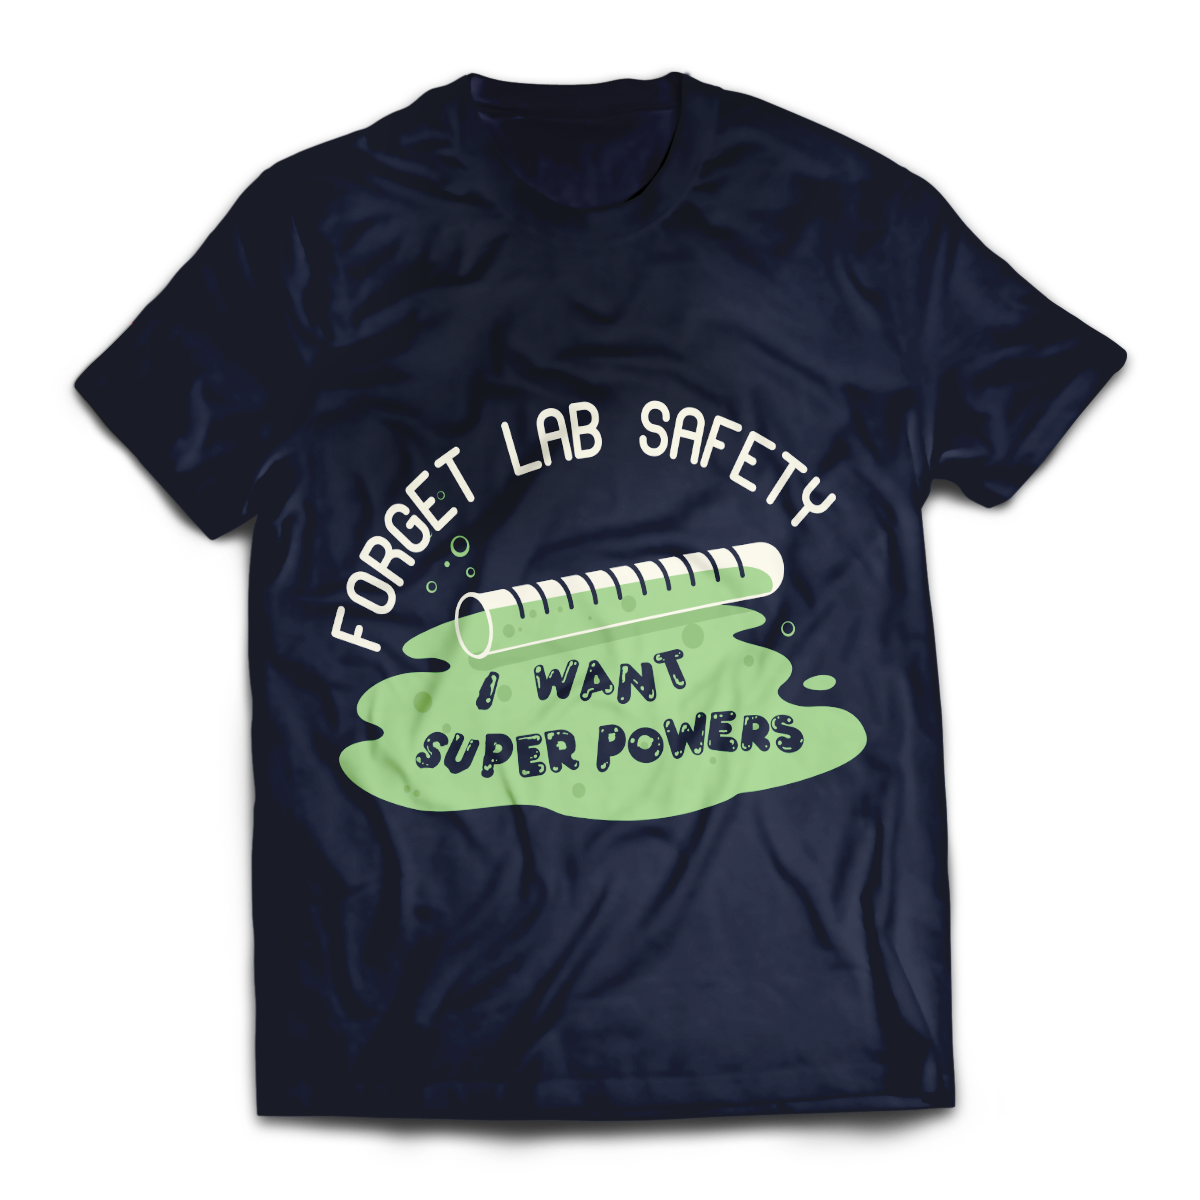 Forget Lab Safety Unisex T-Shirt